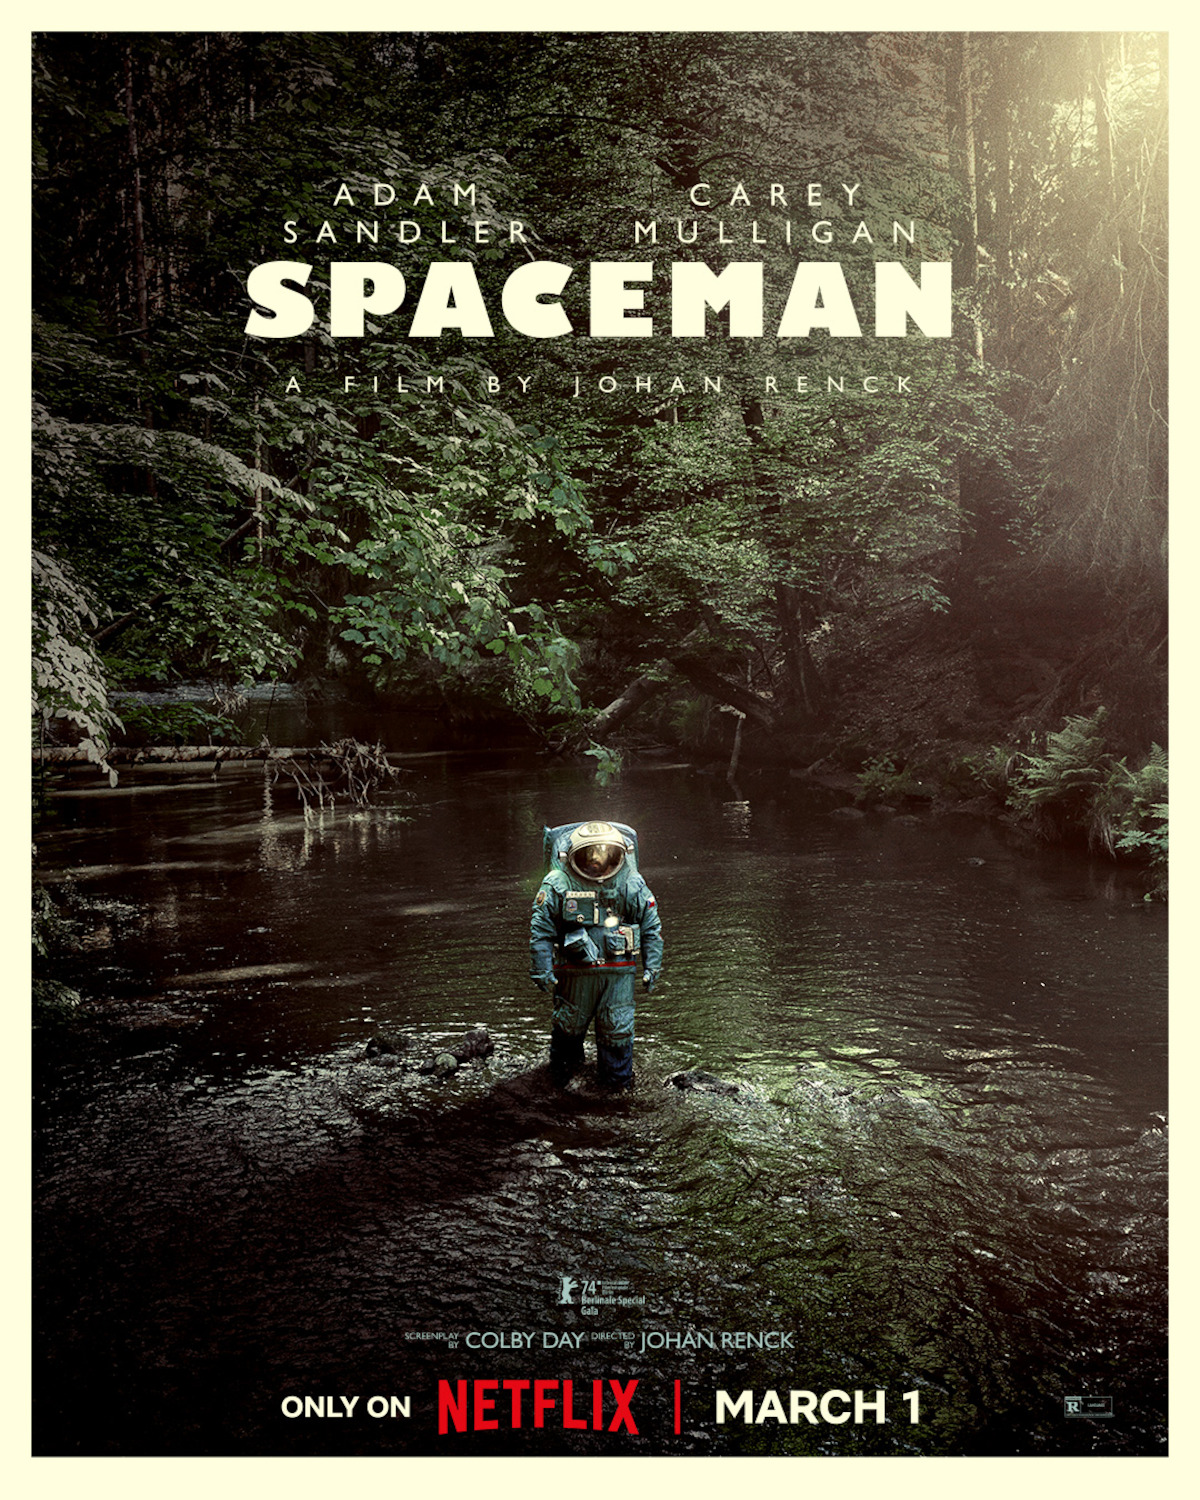 an astronaut in a bulky spacesuit stands in a stream in a forest